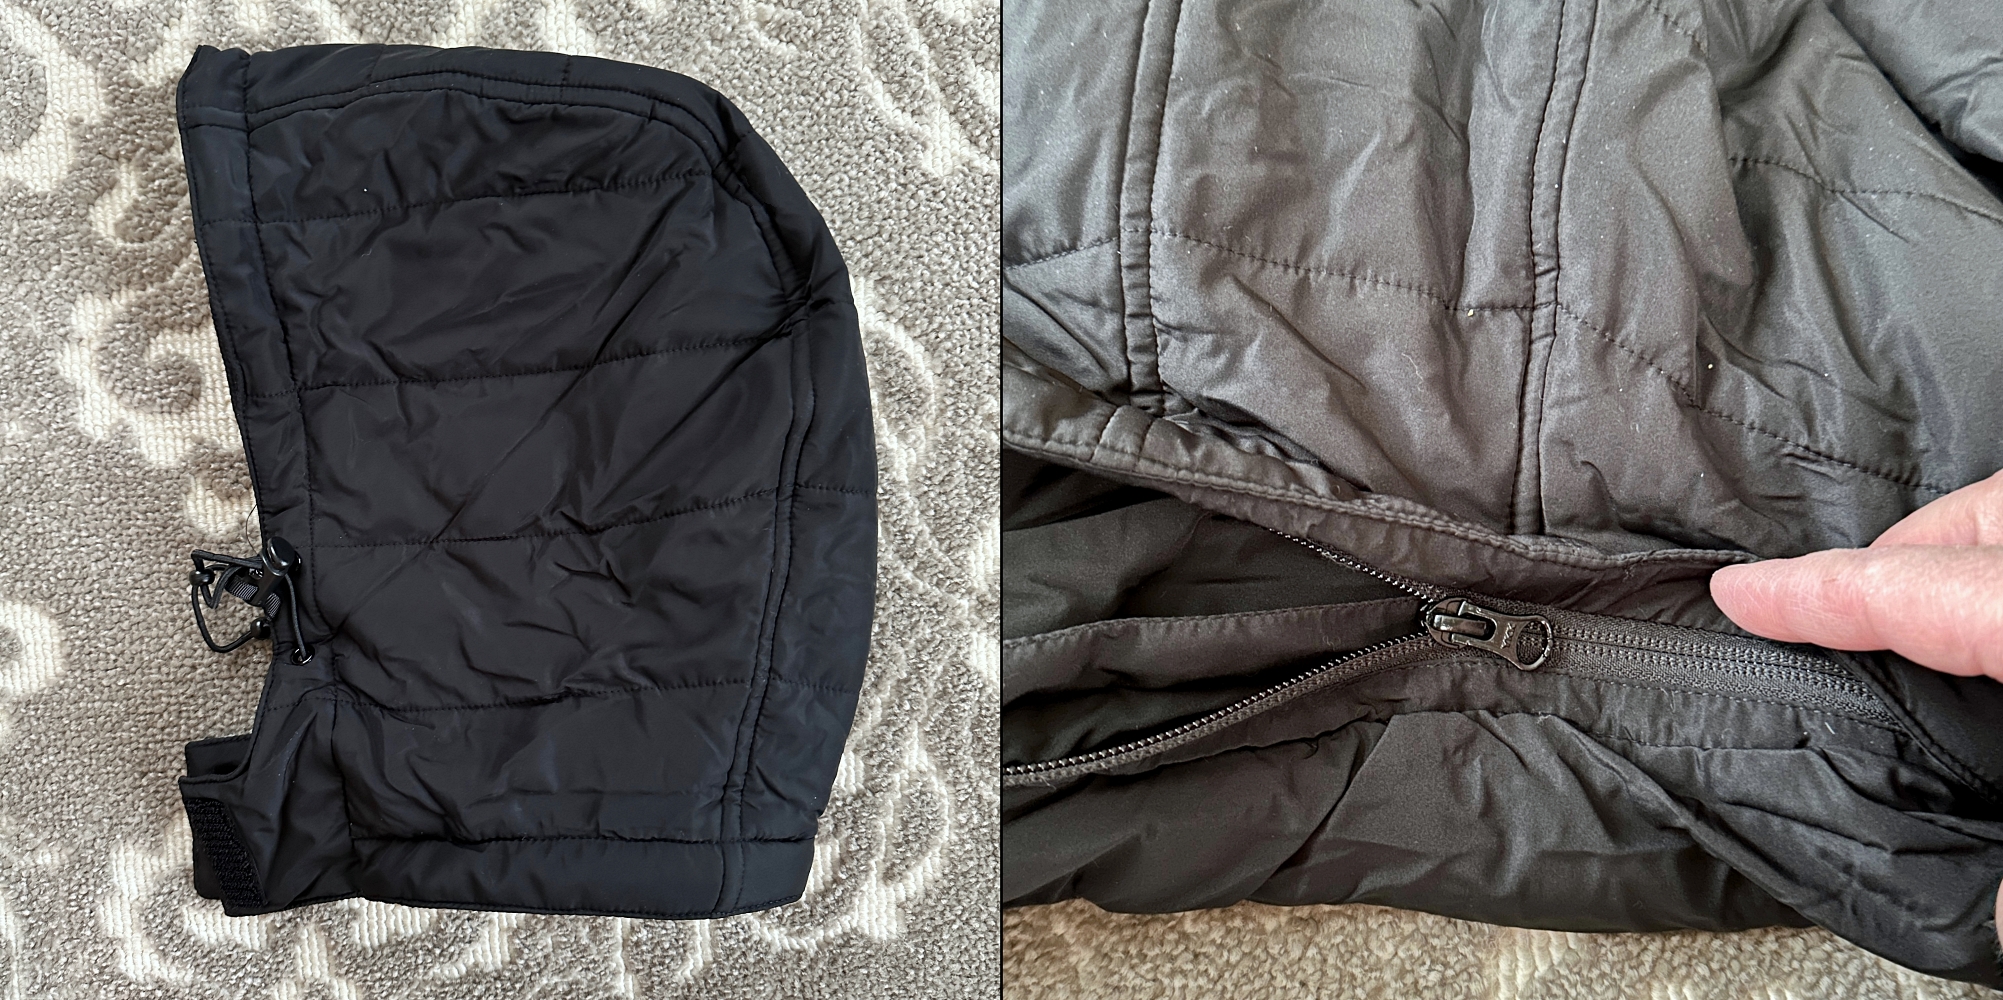 ORORO Men's Heated Down Jacket review - the warmest jacket I have ever ...